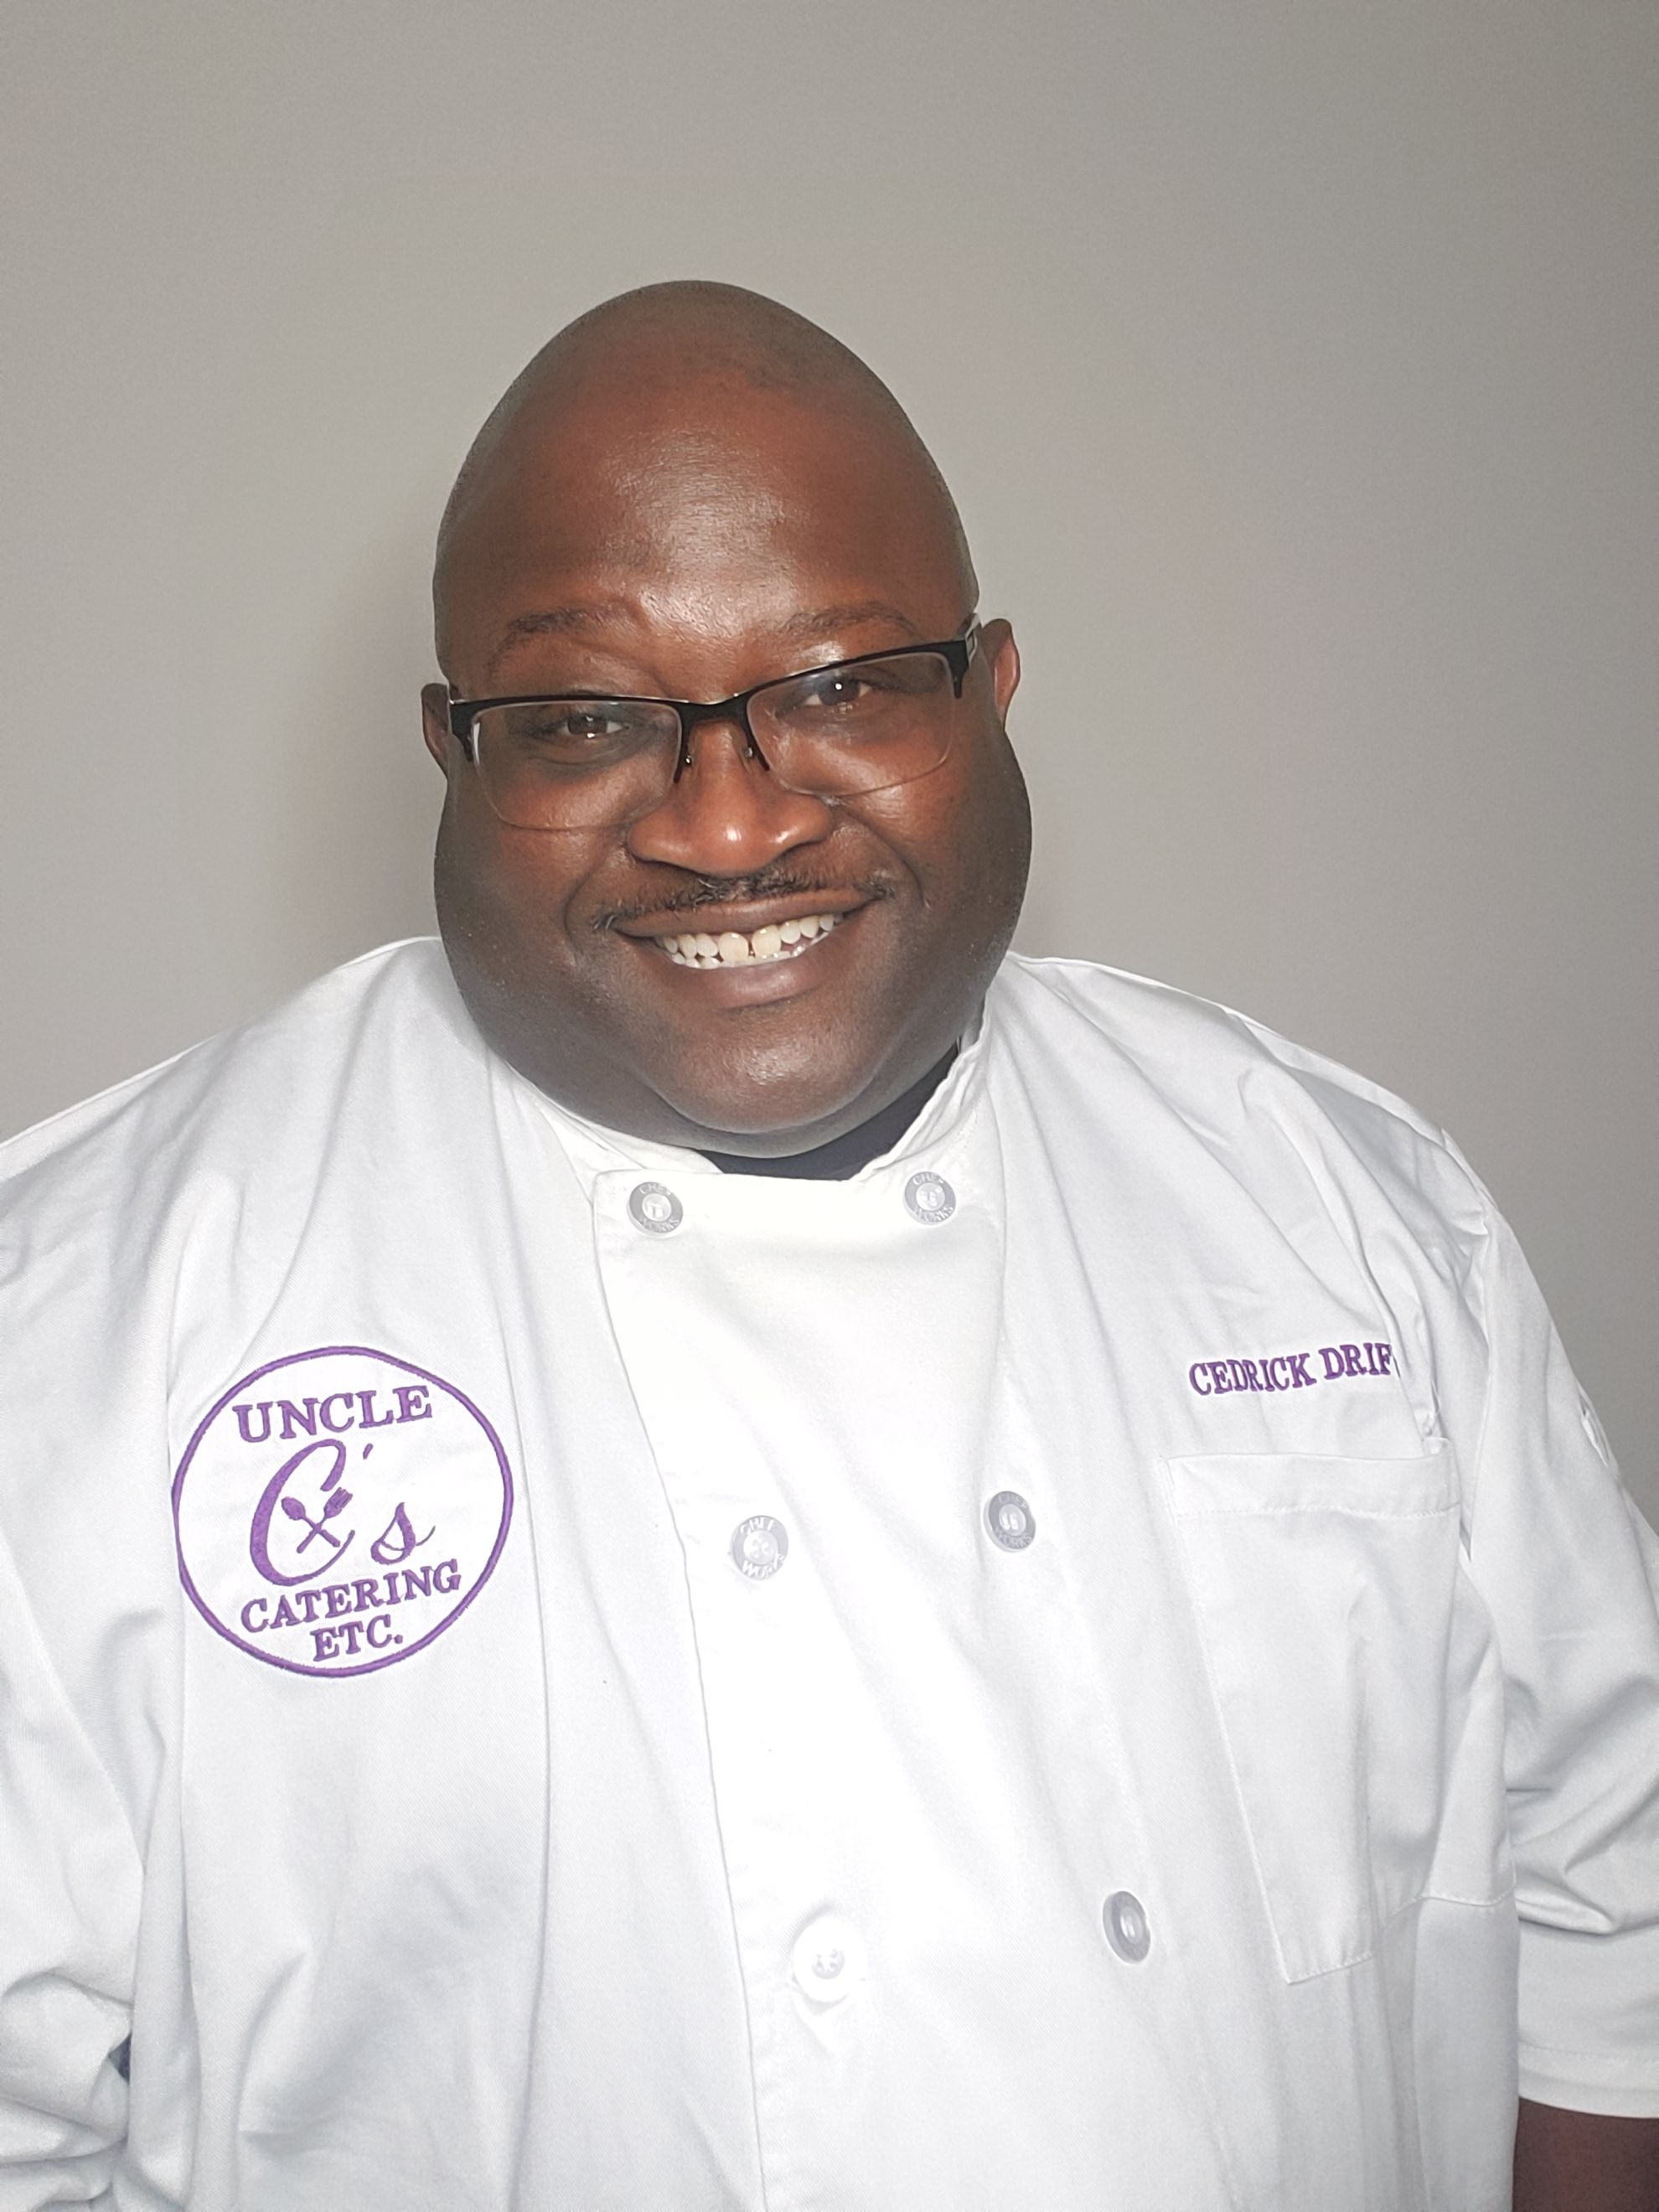 Picture of Cedrick Driffin, owner of Uncle C's Catering.